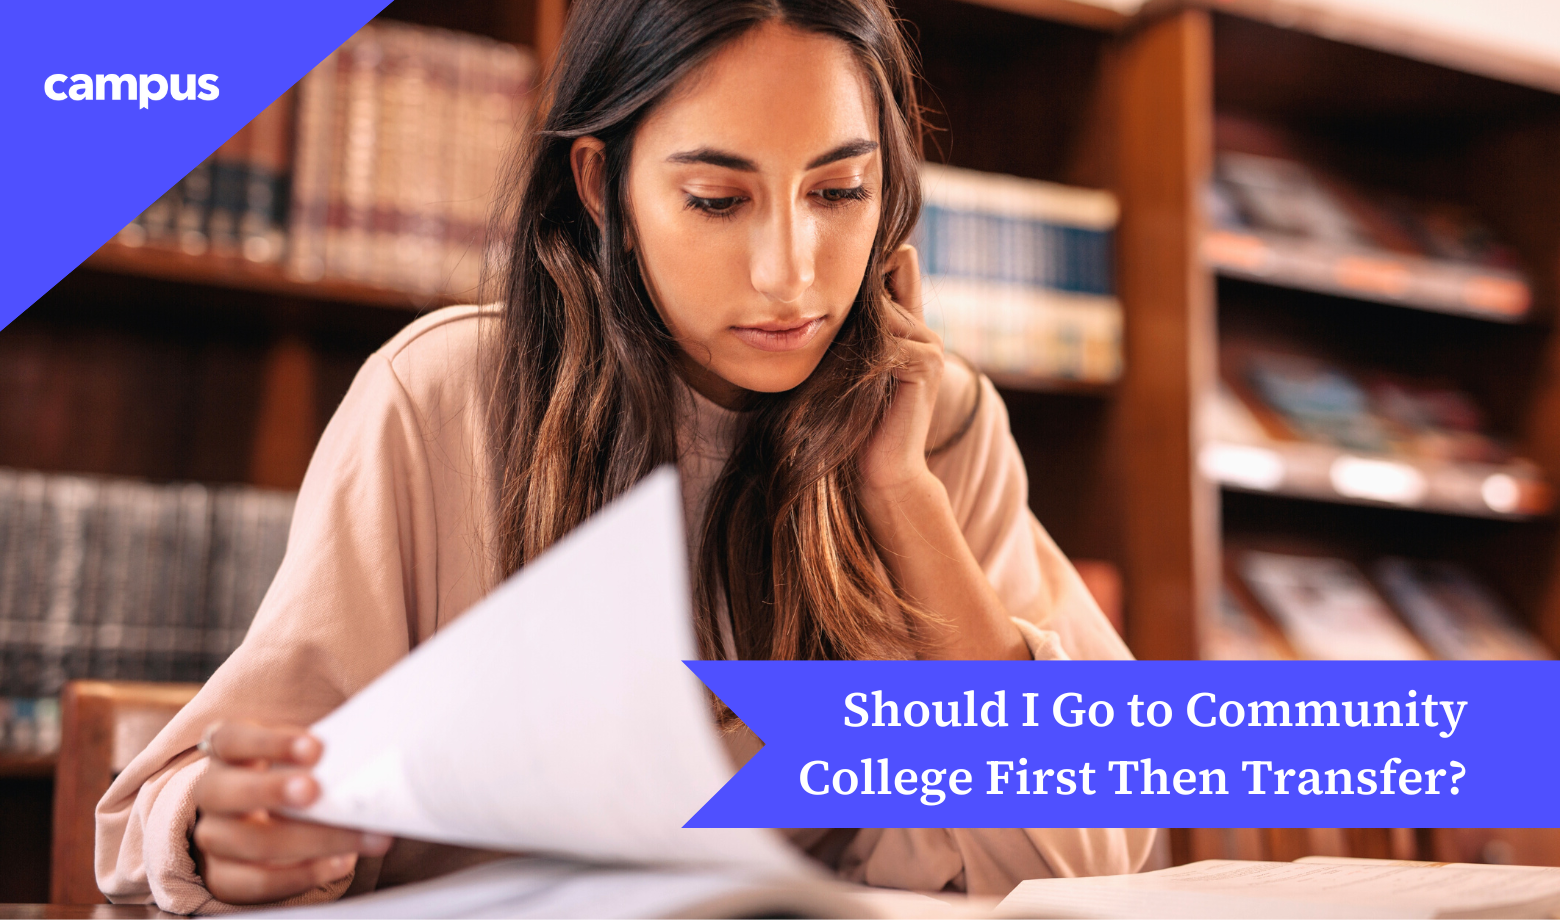 Should I Go to Community College First Then Transfer?